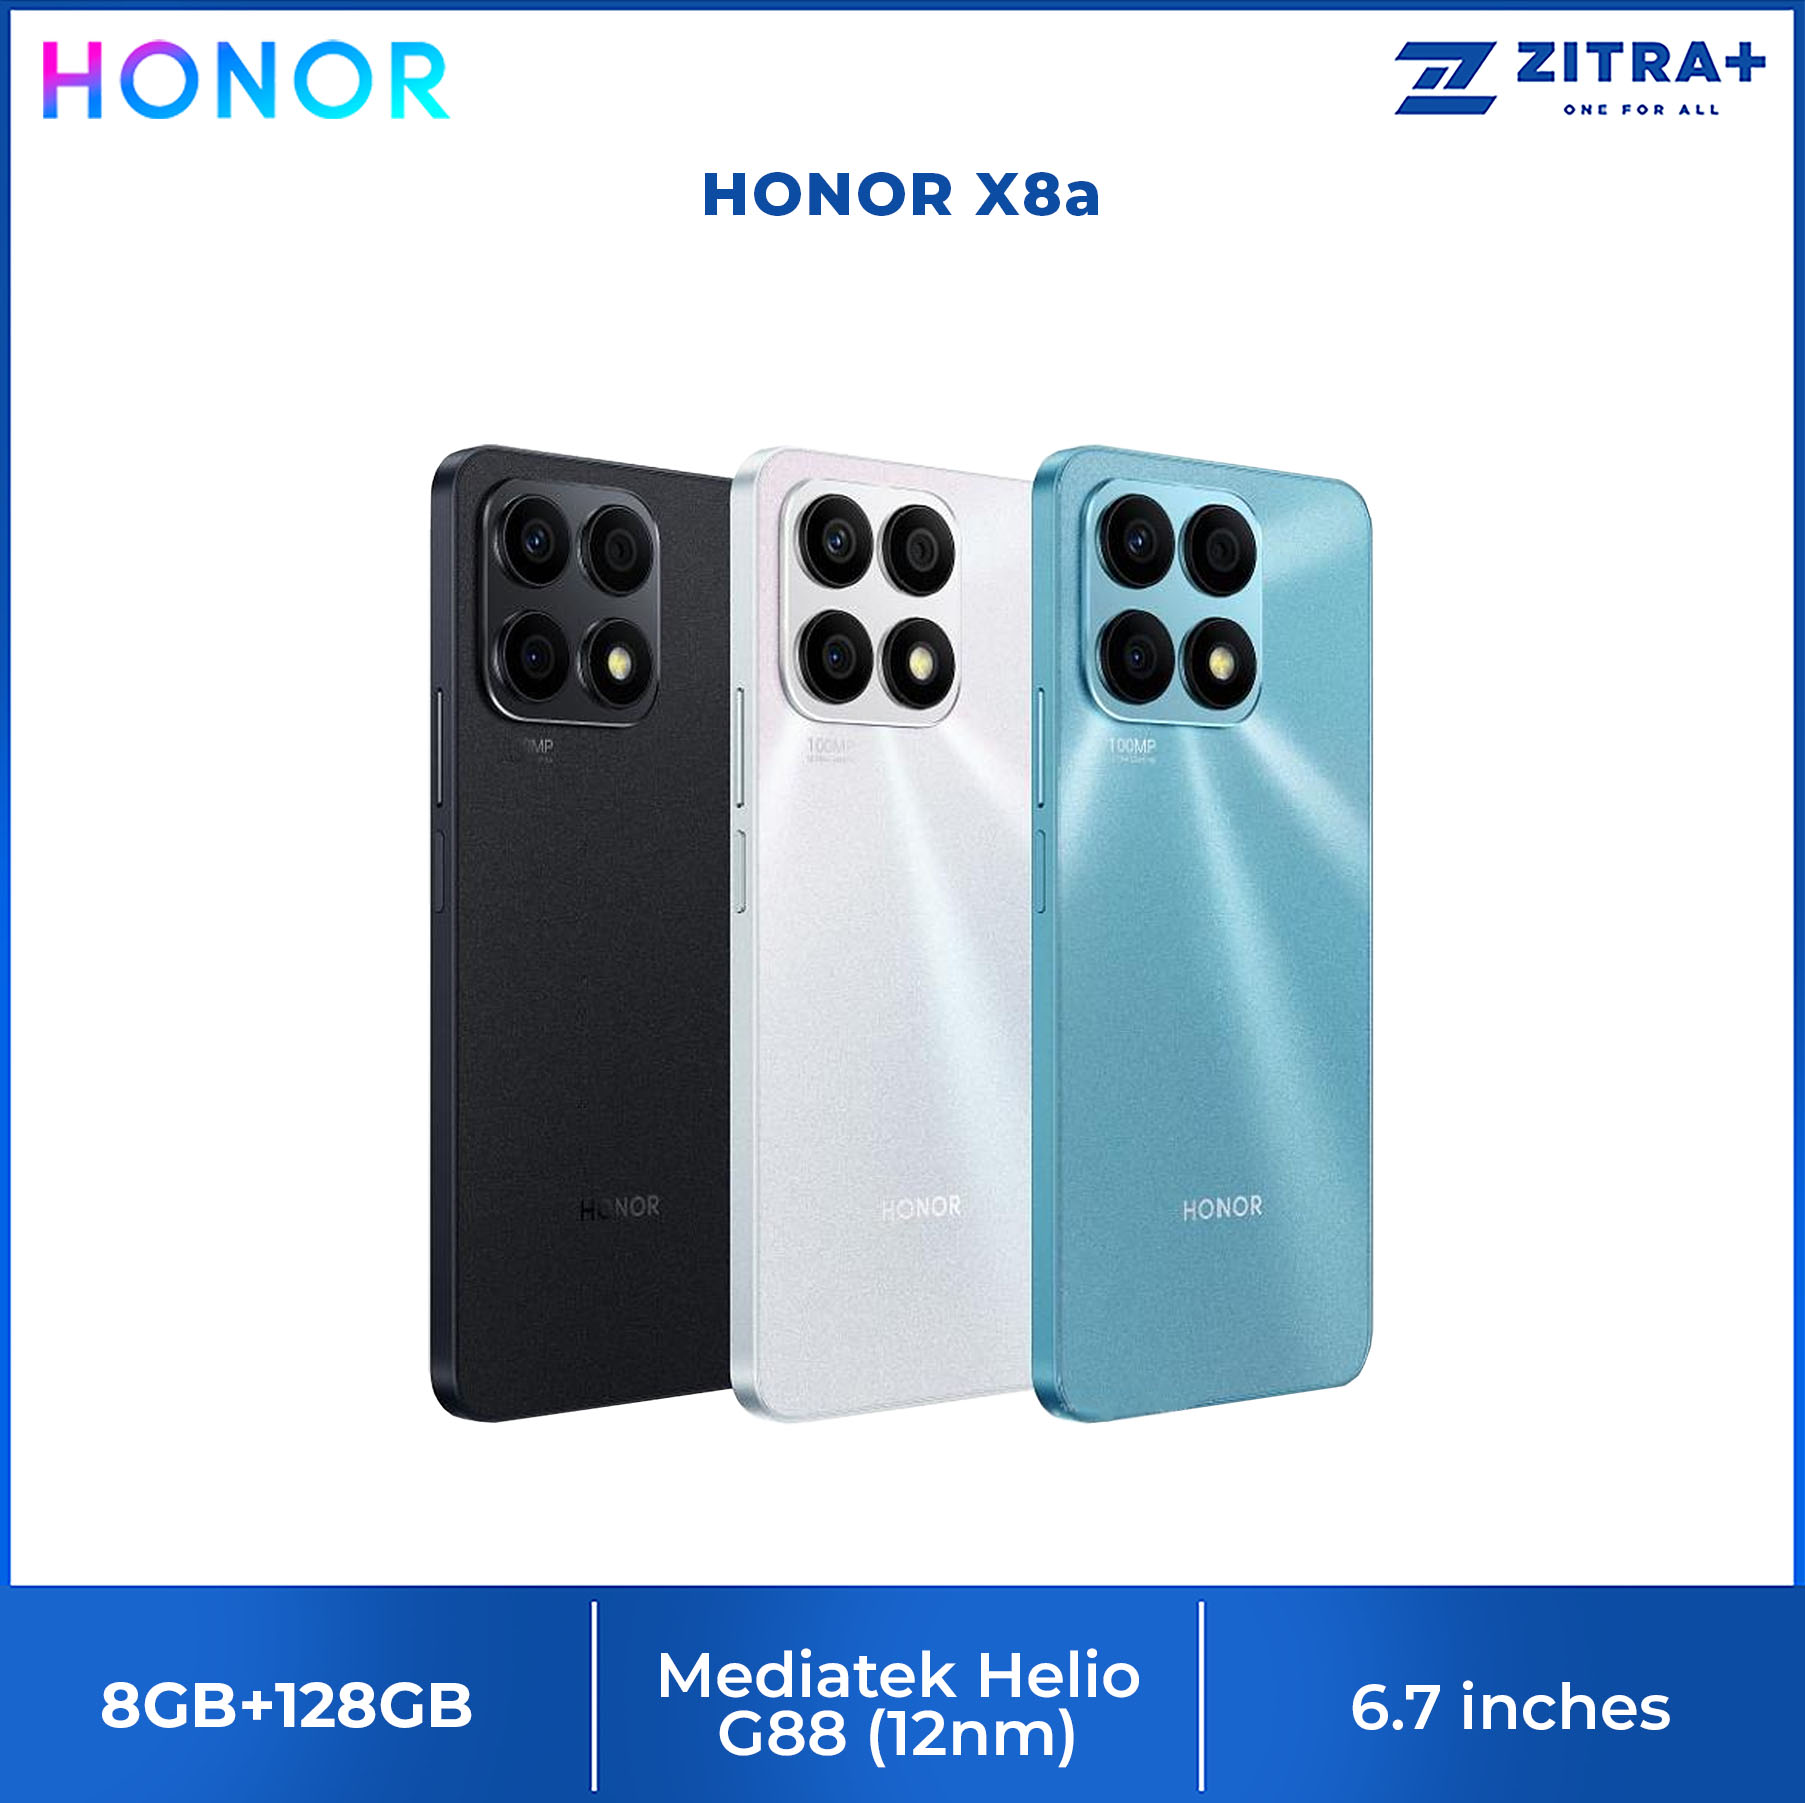 HONOR X8a 8GB+128GB | 6.7'' HONOR FullView Eye Care Display | 100MP Ultra Camera System | Large Storage | Smartphone with 1 Year Warranty